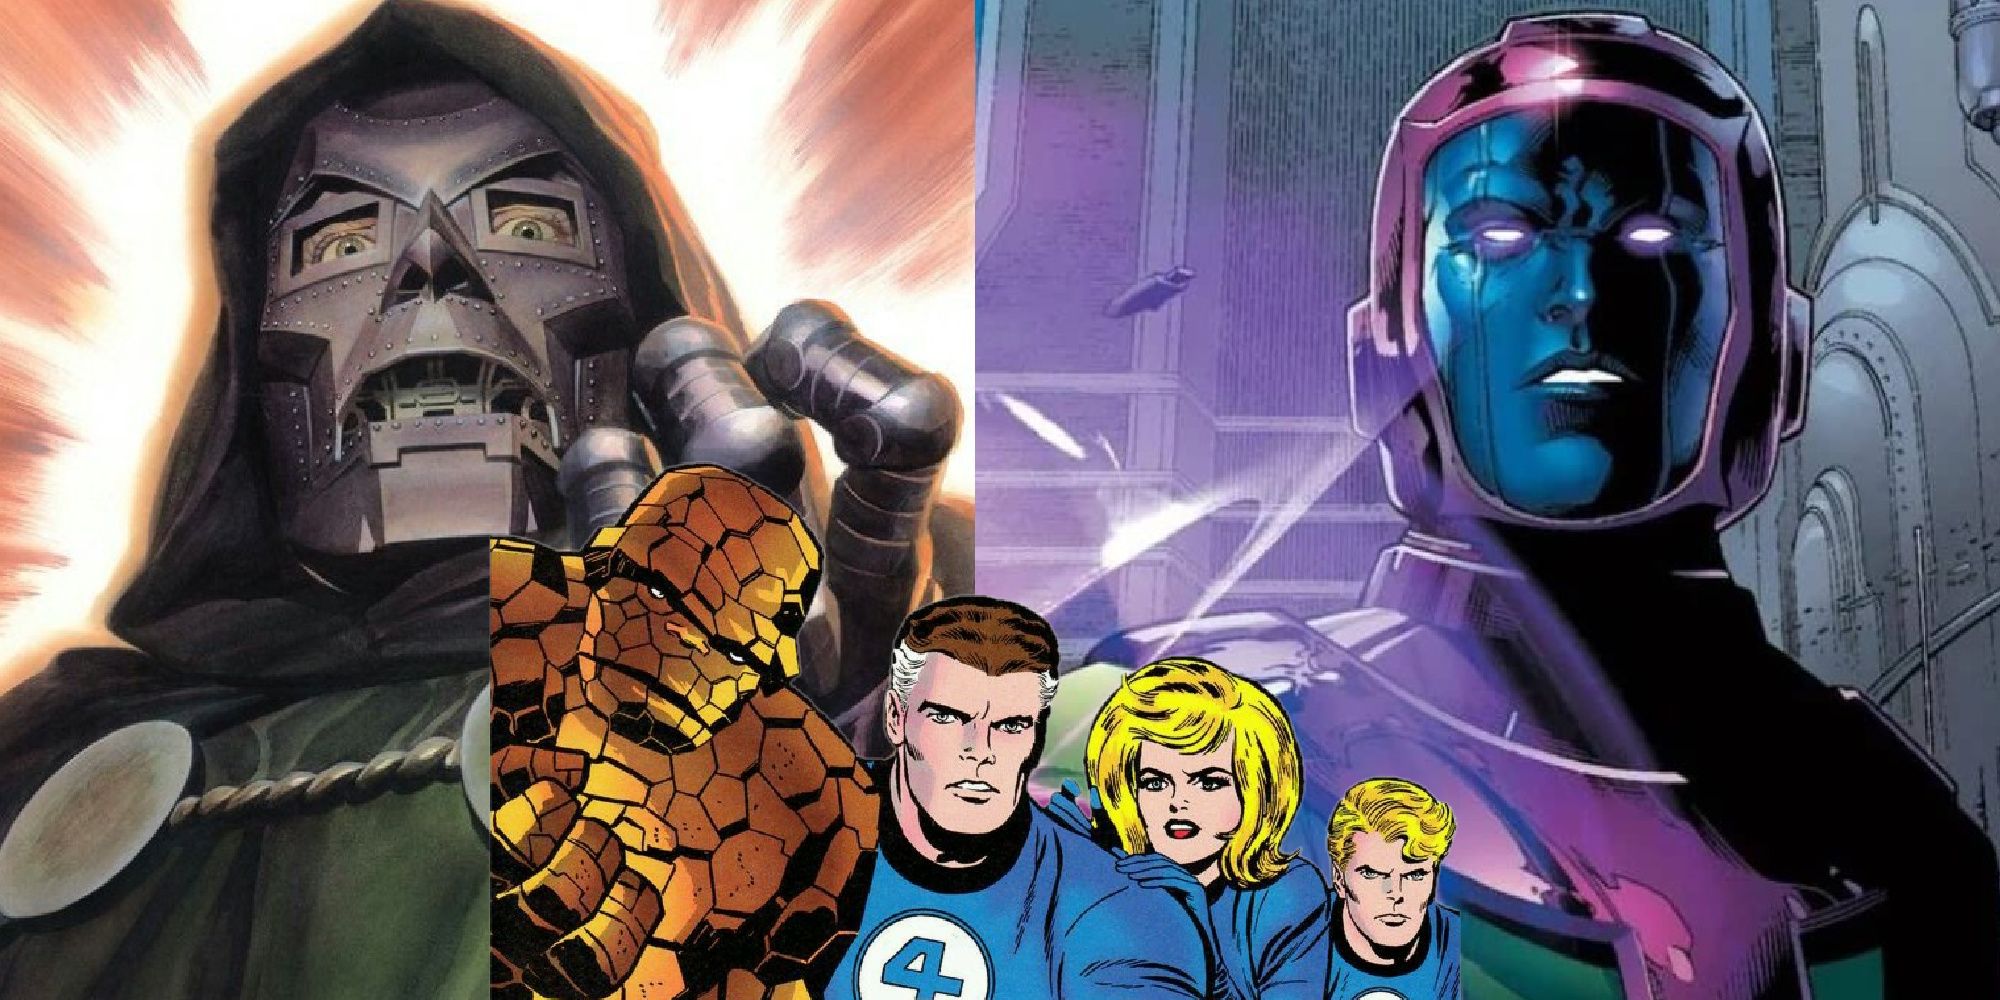 Split image of Doctor Doom and Kang The Conqueror from Marvel Comics with the Fantastic Four overlaid on them.